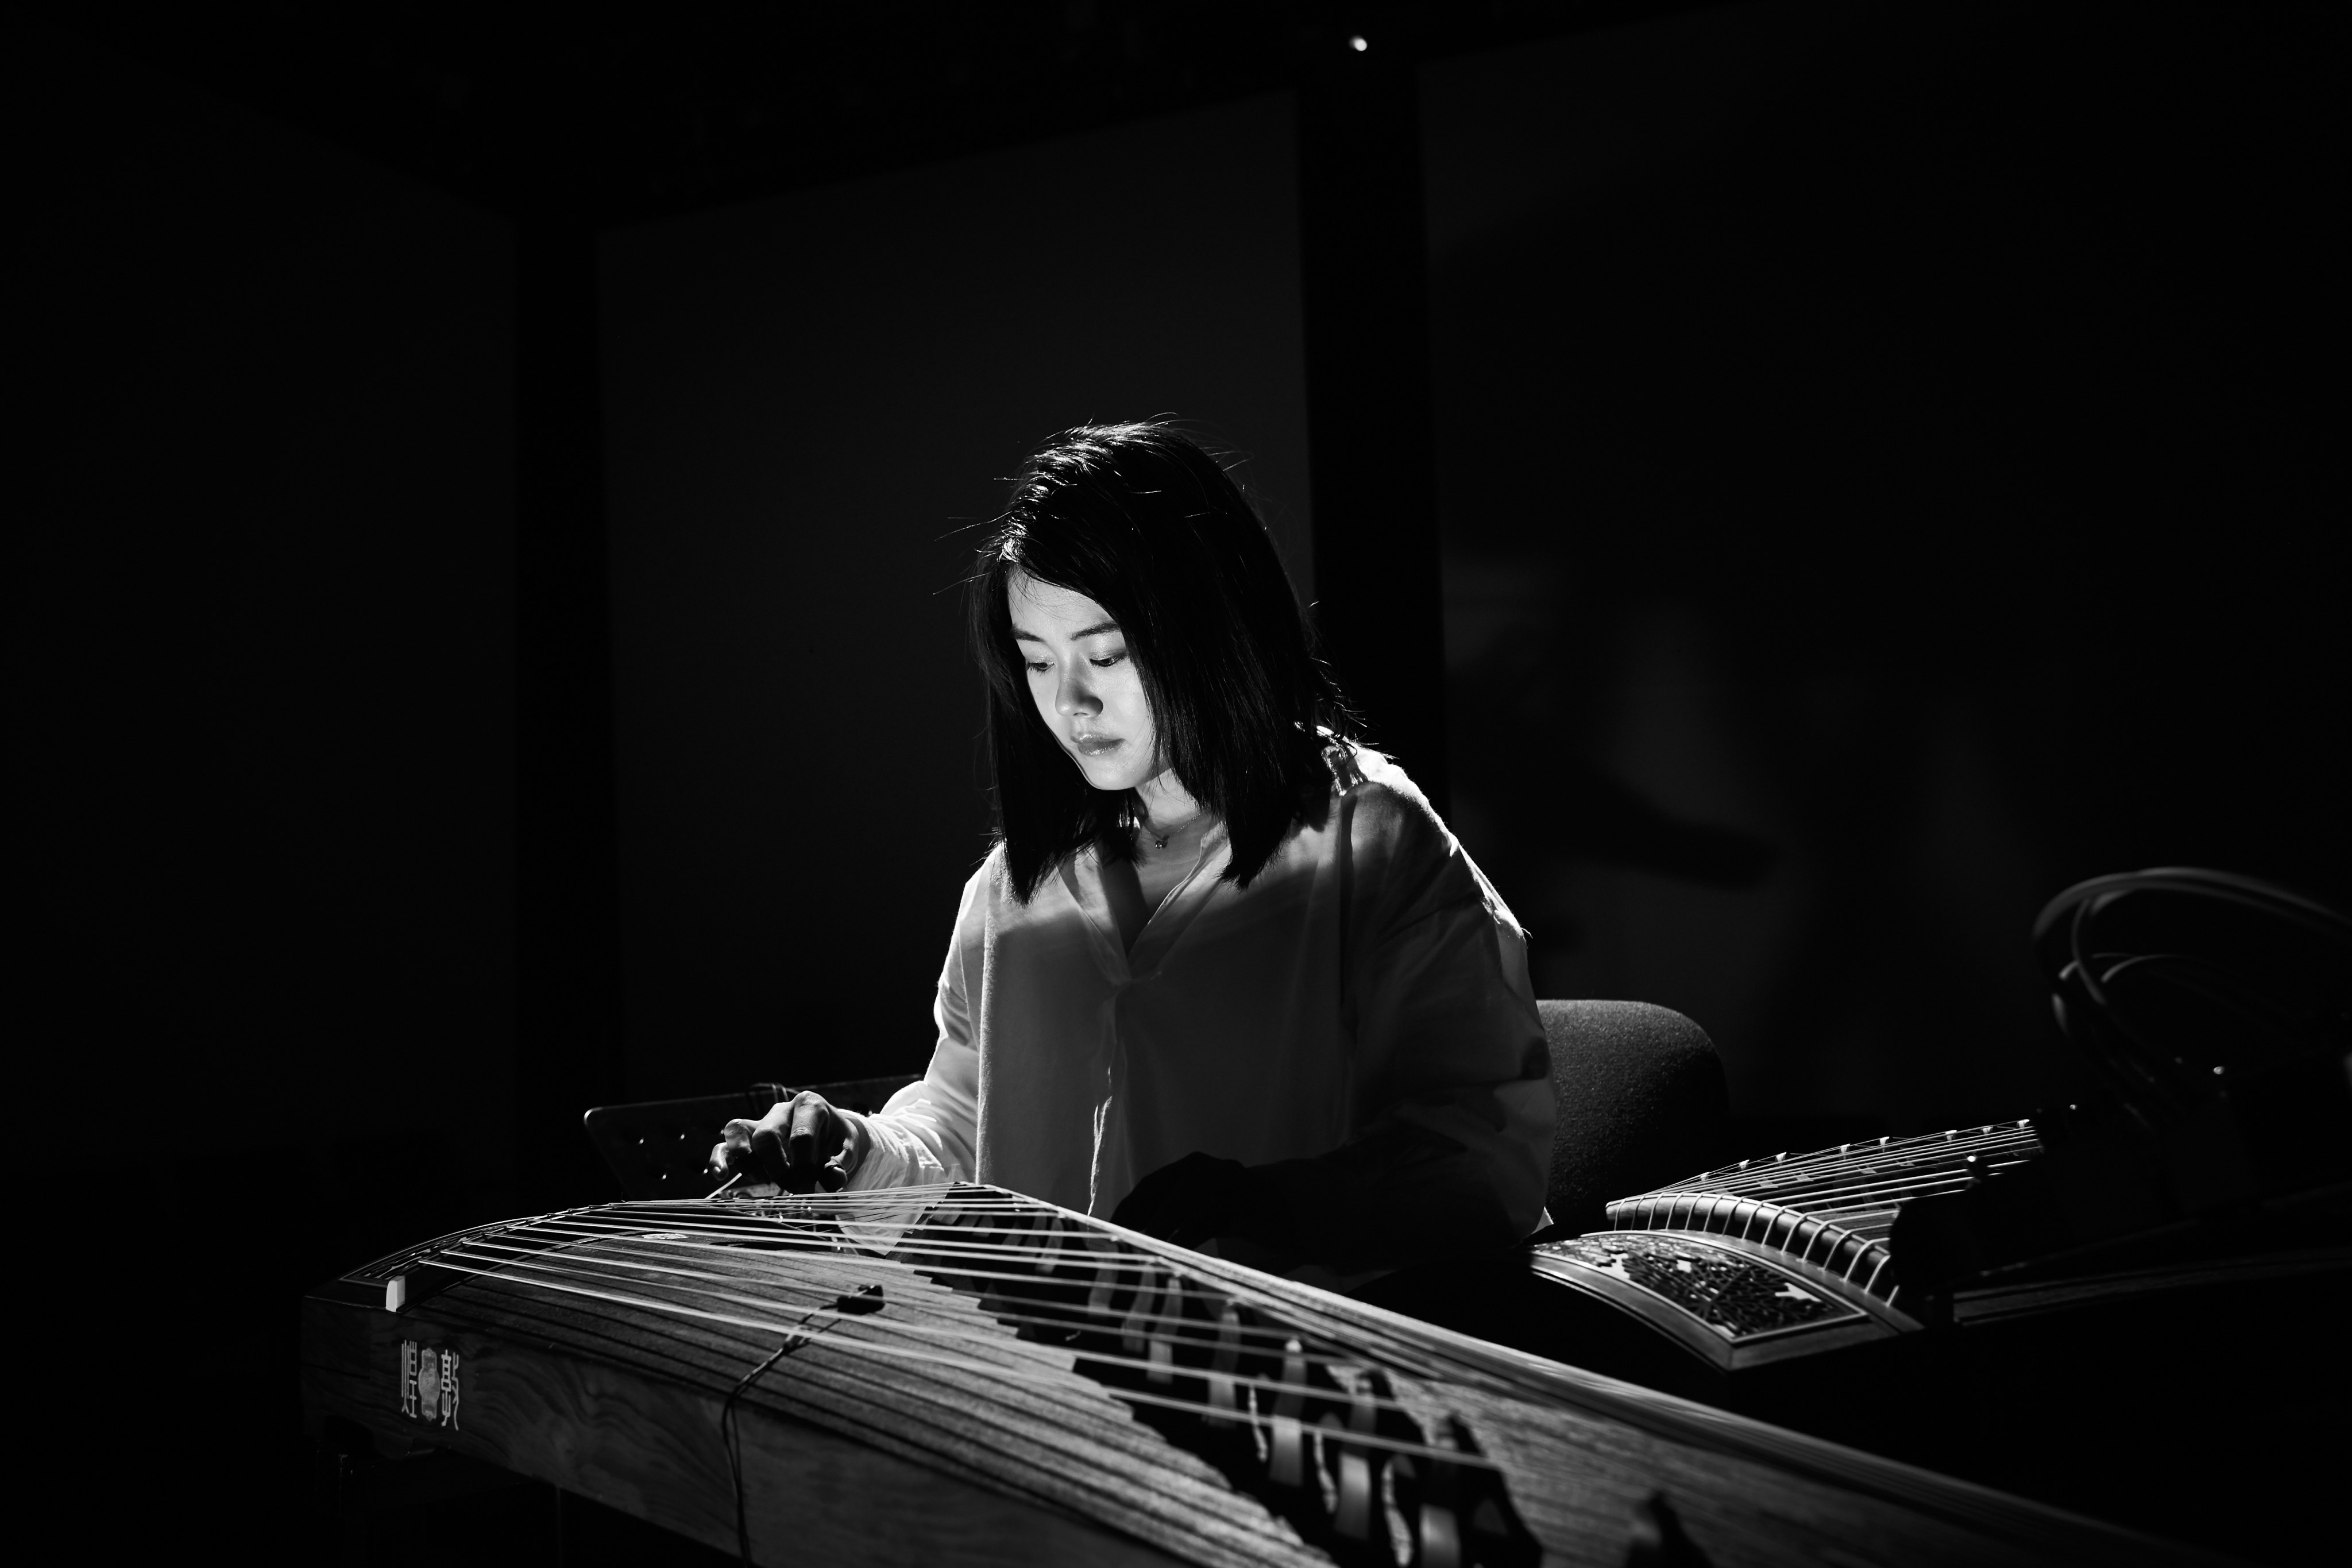 Yu Miao playing the guzheng, a 21-string instrument that has been played in China since the Qin dynasty. Photo: Yu Miao